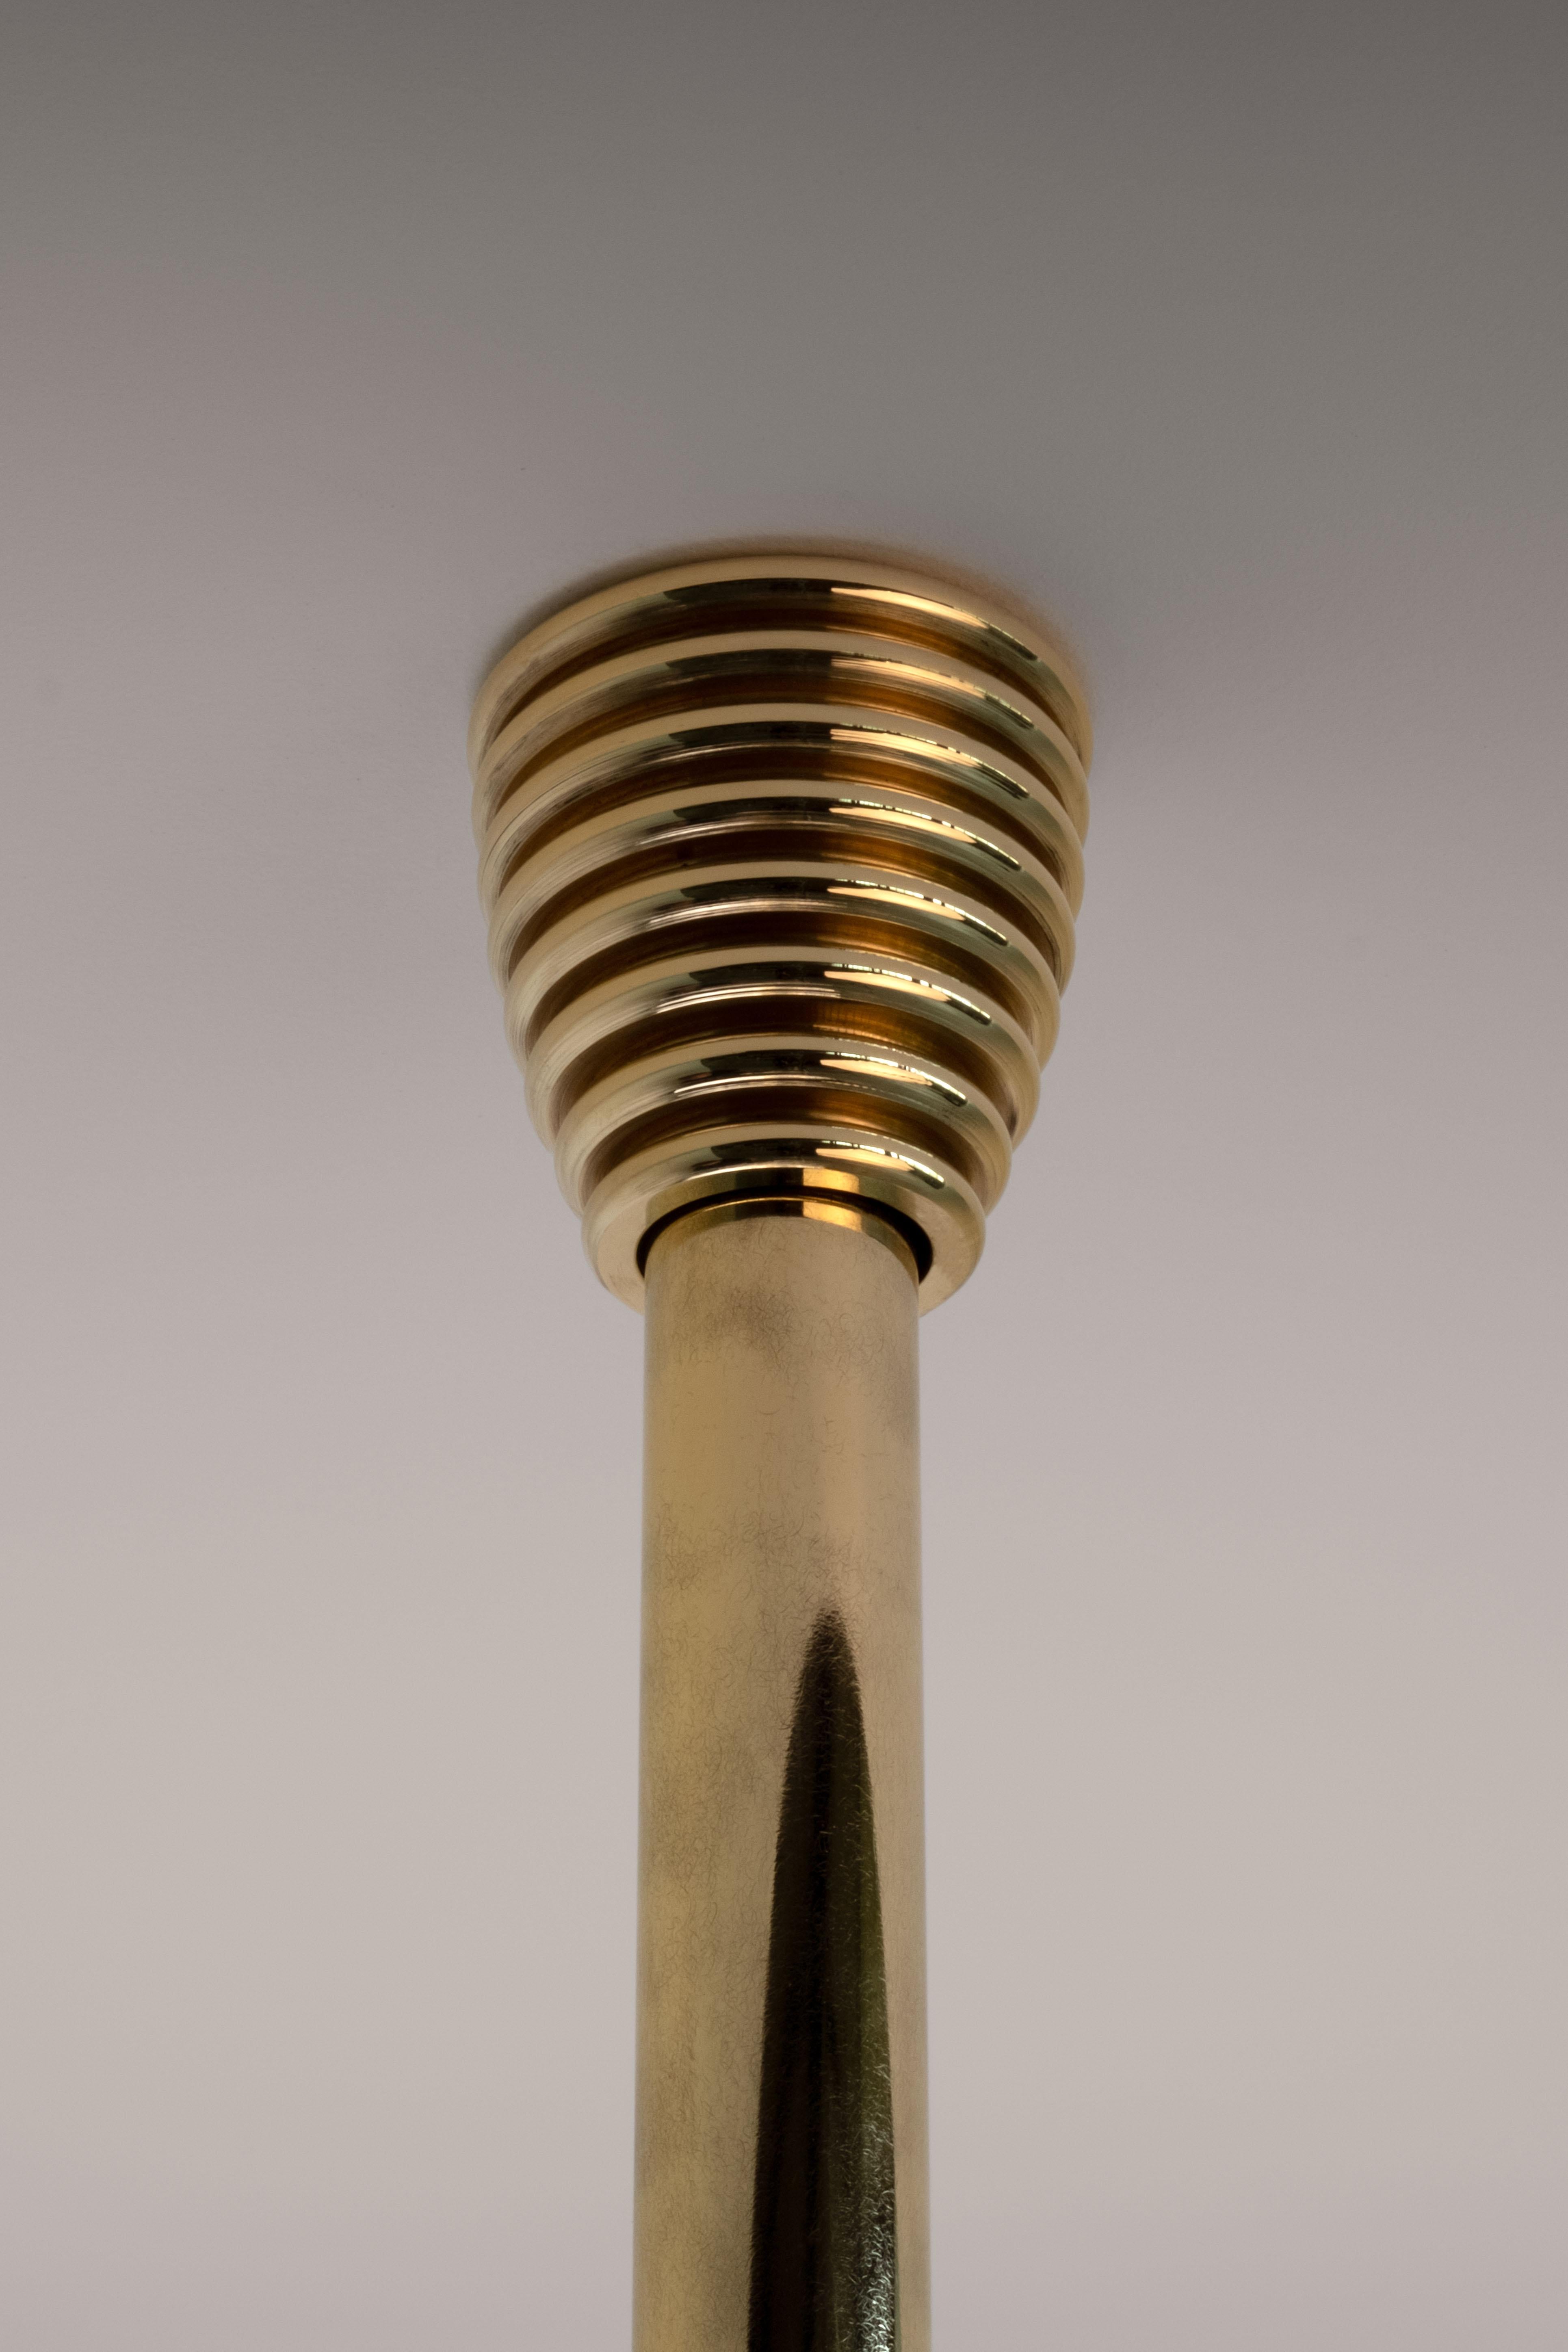 The Insulator 'A' Pendant in dark brass and frosted glass by NOVOCASTRIAN deco For Sale 10